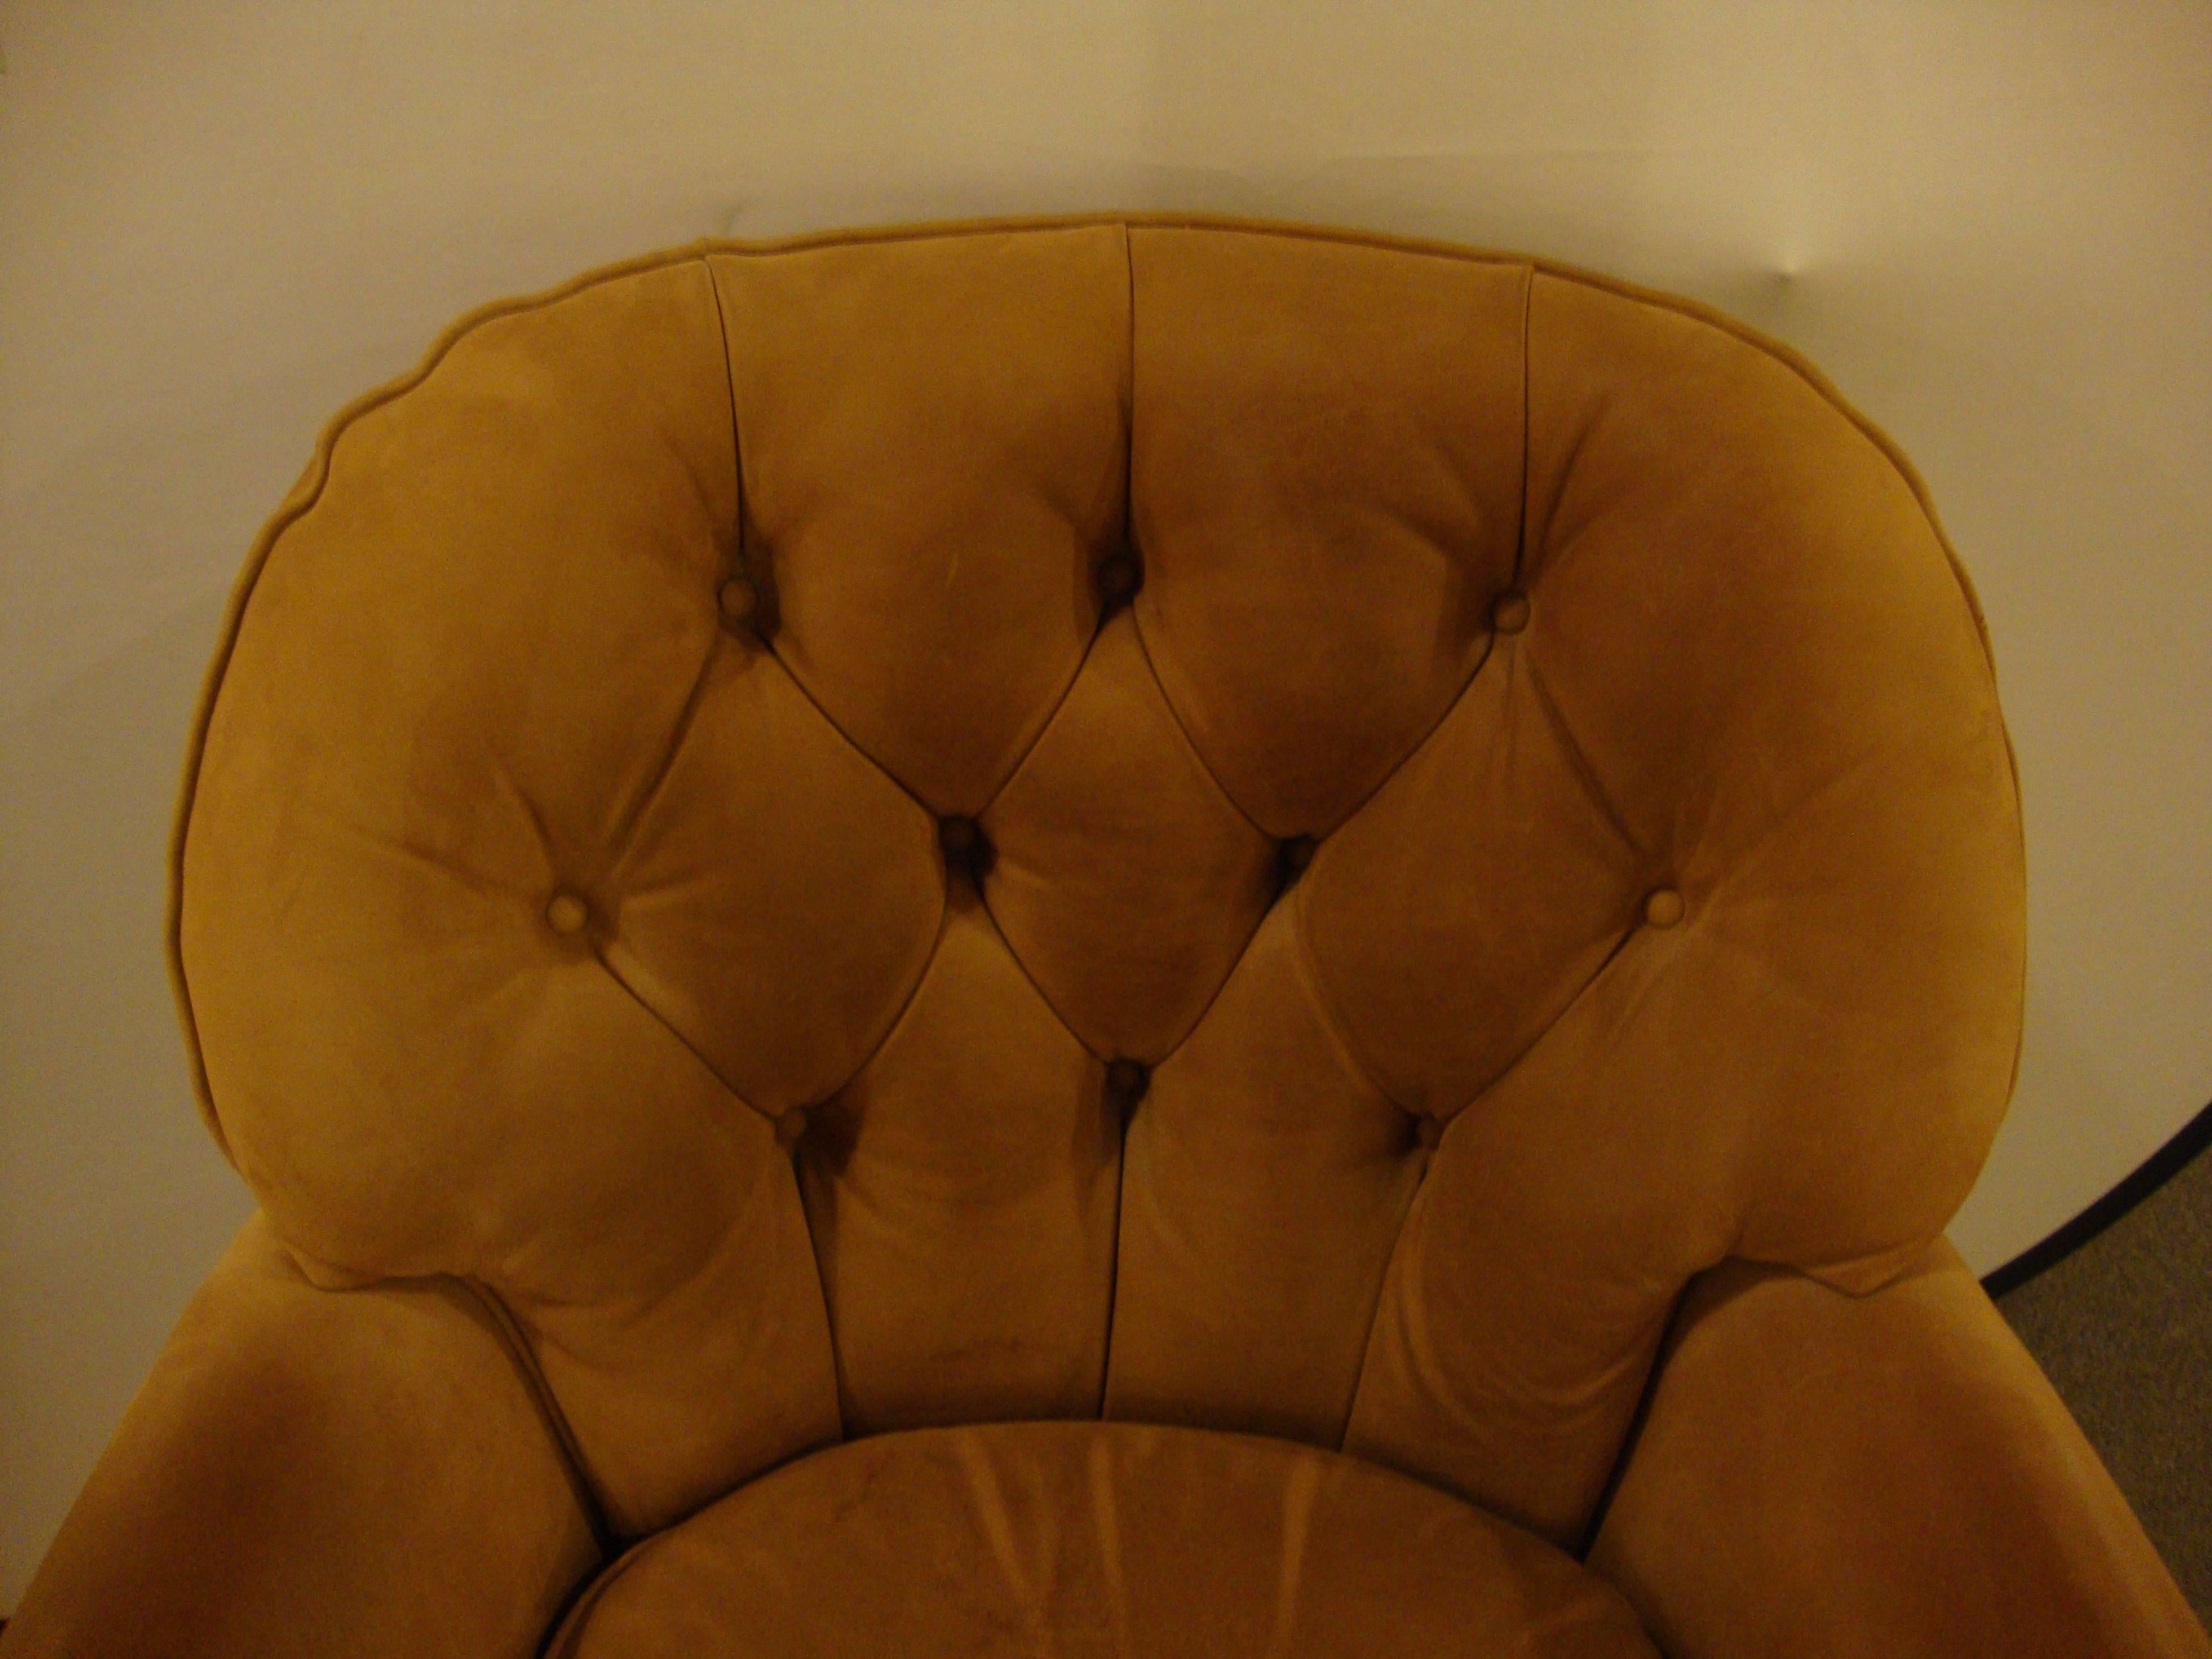 Hancock & Moore leather tufted back with nailhead Design Armchair. Distressed and worn as is the intended look and desired look.

Measures: Seat height 18 Inches.